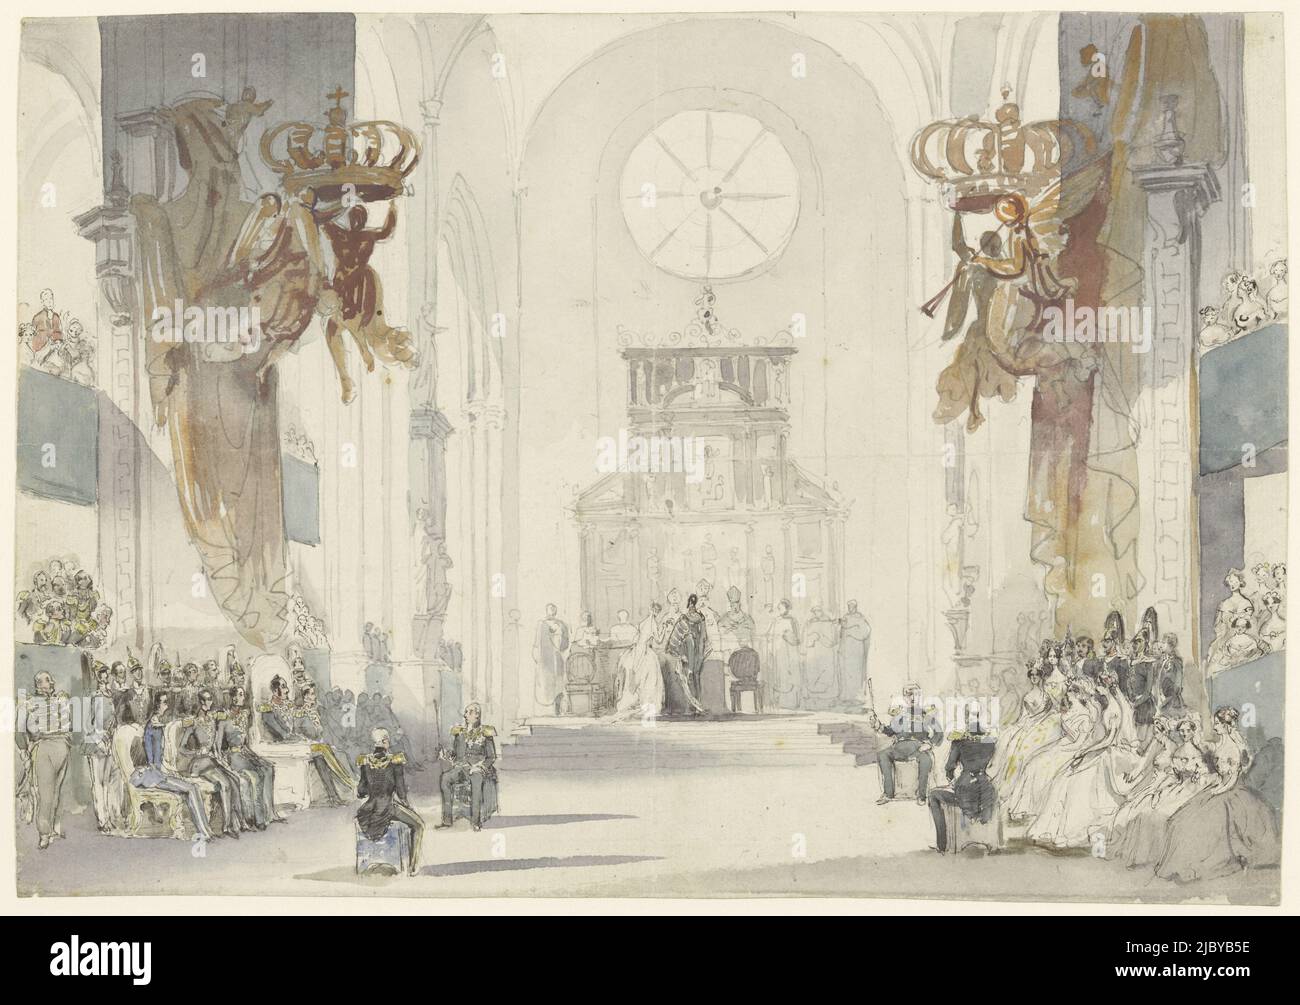 Marriage of Princess Louise to Prince Charles of Sweden, Fritz Ludwig von Dardel, 1850, Marriage of Louise, Princess of the Netherlands, later Queen of Sweden and Norway, to Crown Prince Charles XV, later King of Sweden and Norway, in Archbishop's Church of St. Nicholas in Stockholm, June 19, 1850., draughtsman: Fritz Ludwig von Dardel, 1850, paper, pen, brush, h 204 mm × w 290 mm Stock Photo